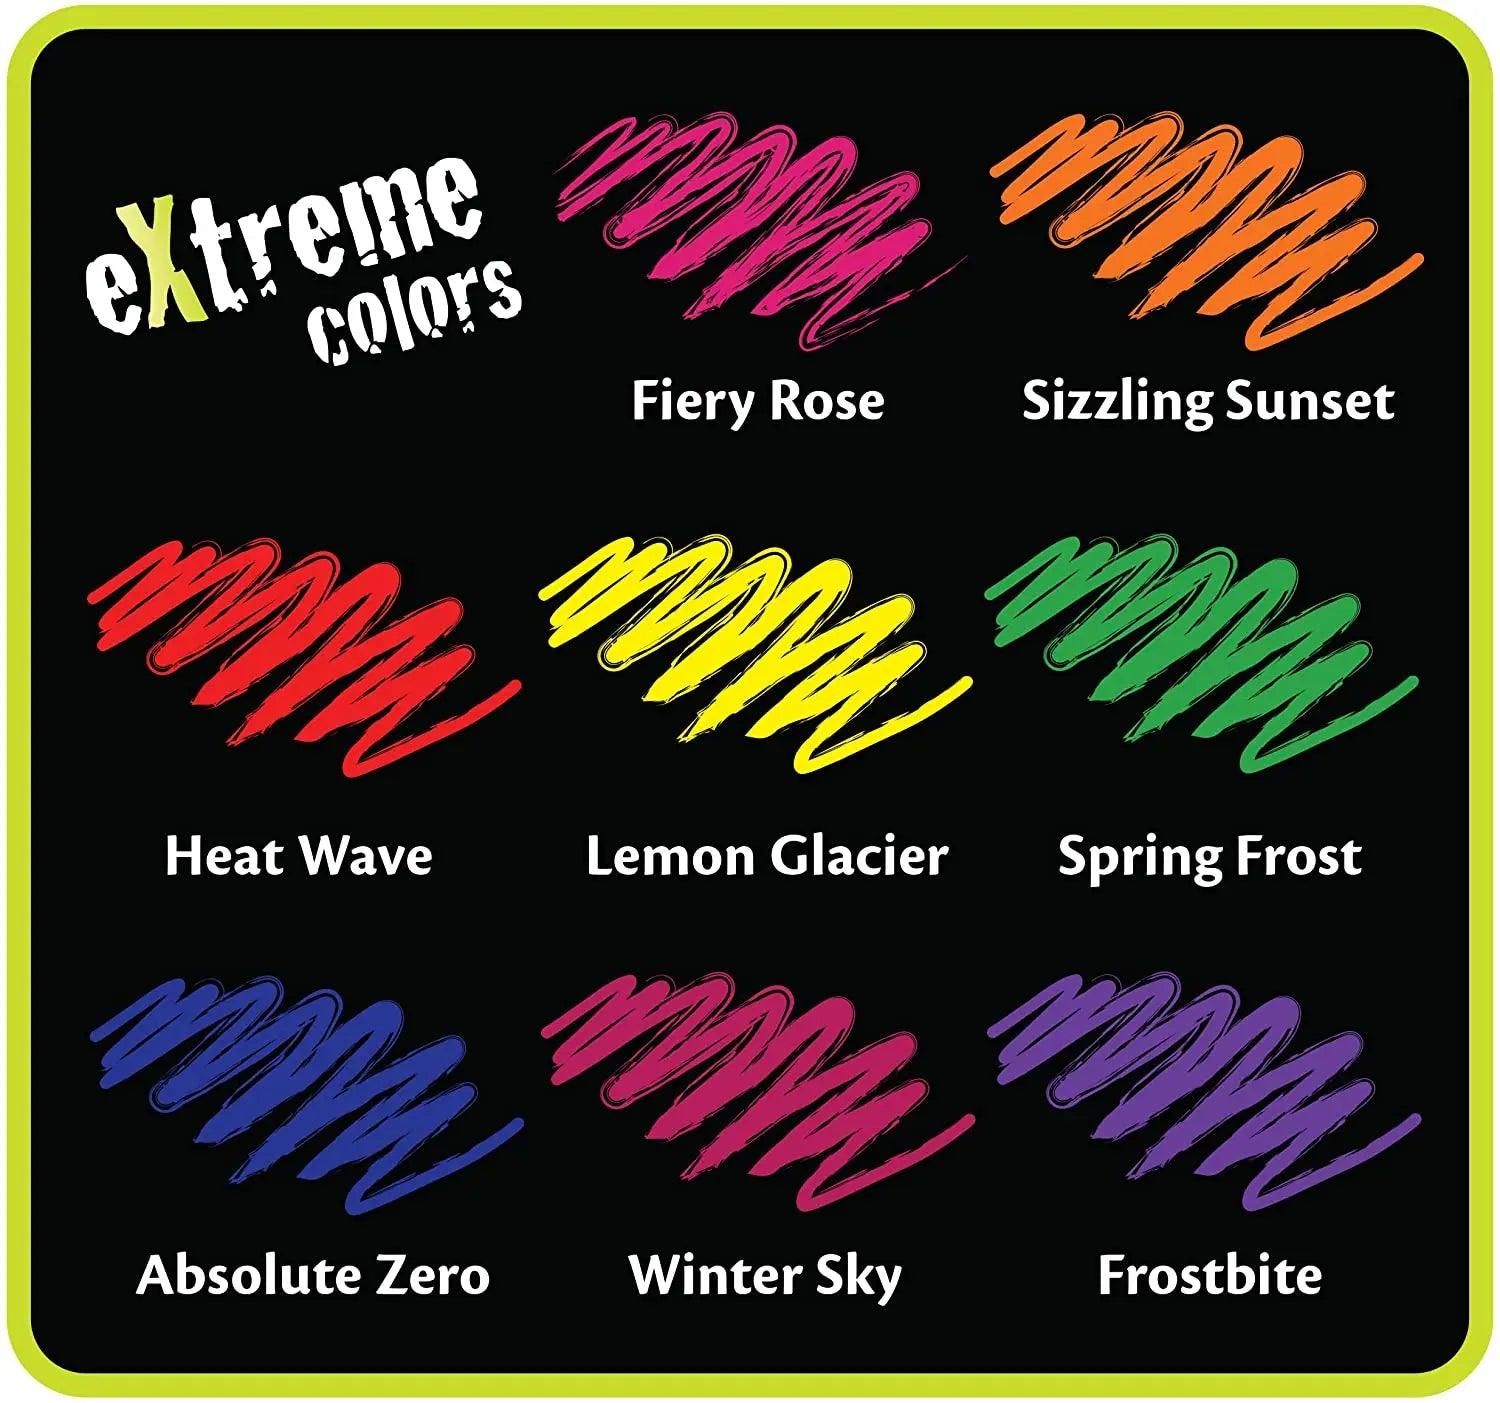 Crayola Twistable Crayons Extreme Colours Pack Of 8 The Stationers